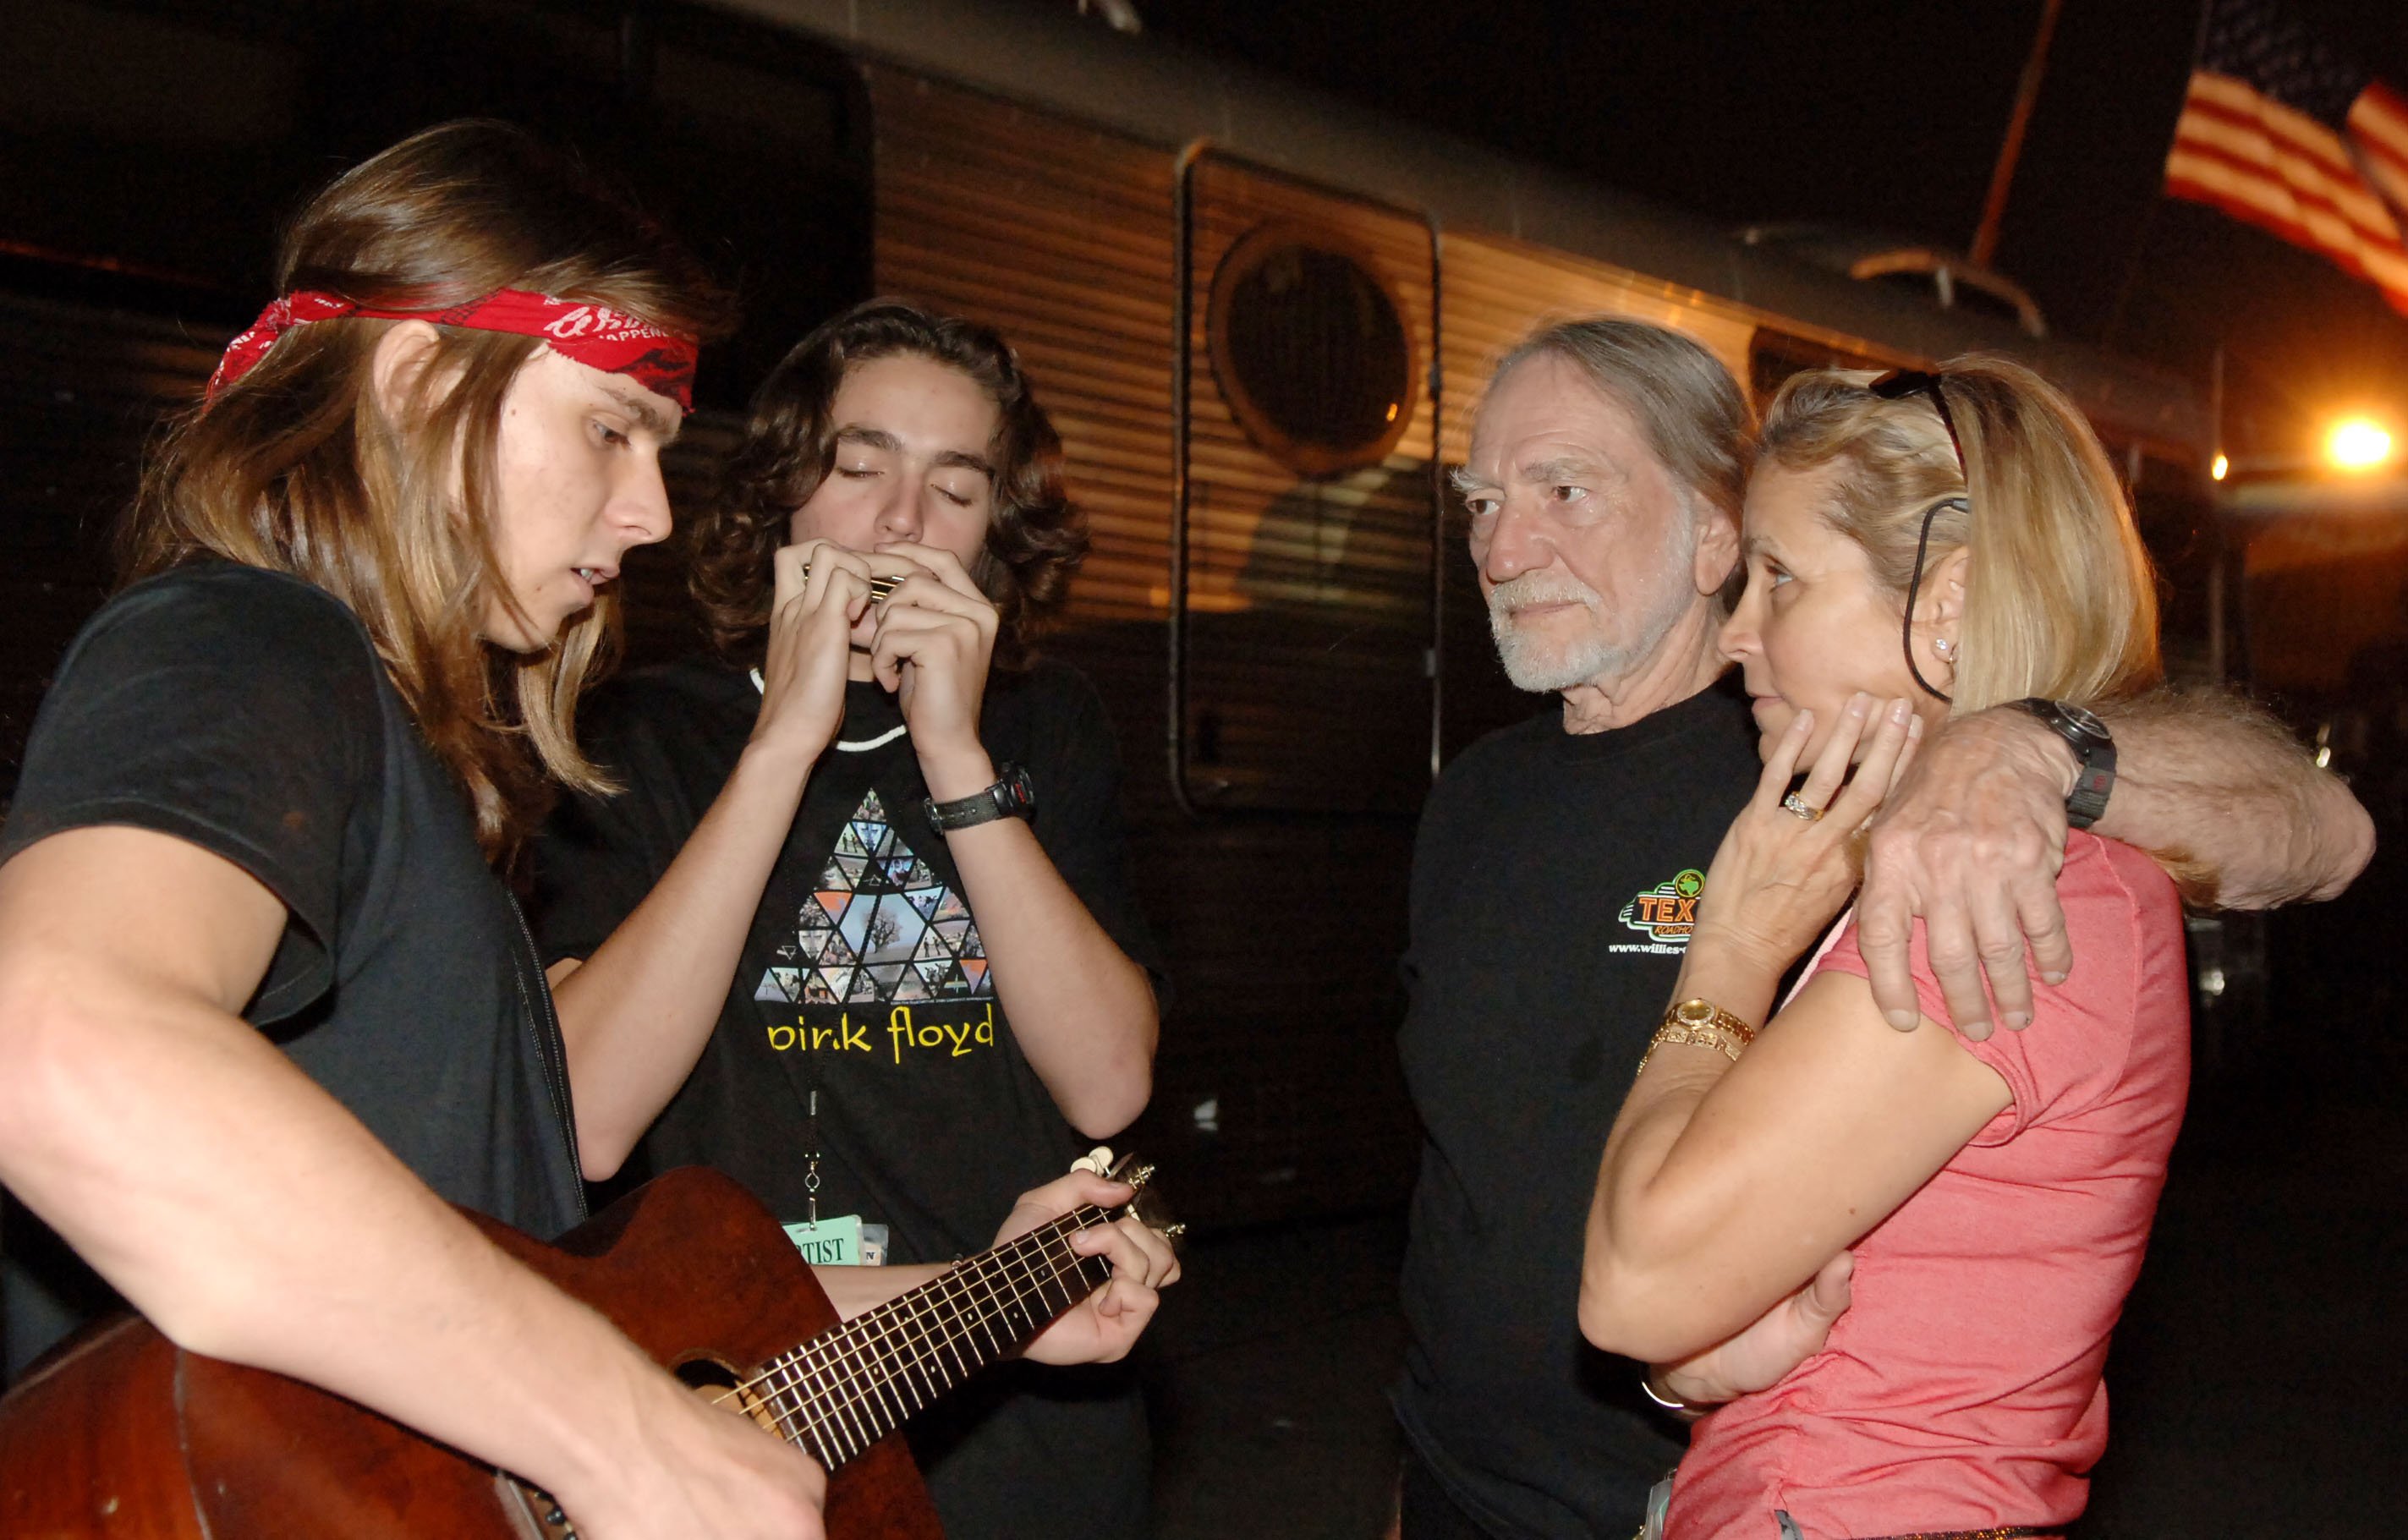 Willie Nelson, Annie Nelson and sons in 2005 at Tweeter Center in Tinley Park, Illinois, United States | Source: Getty Images